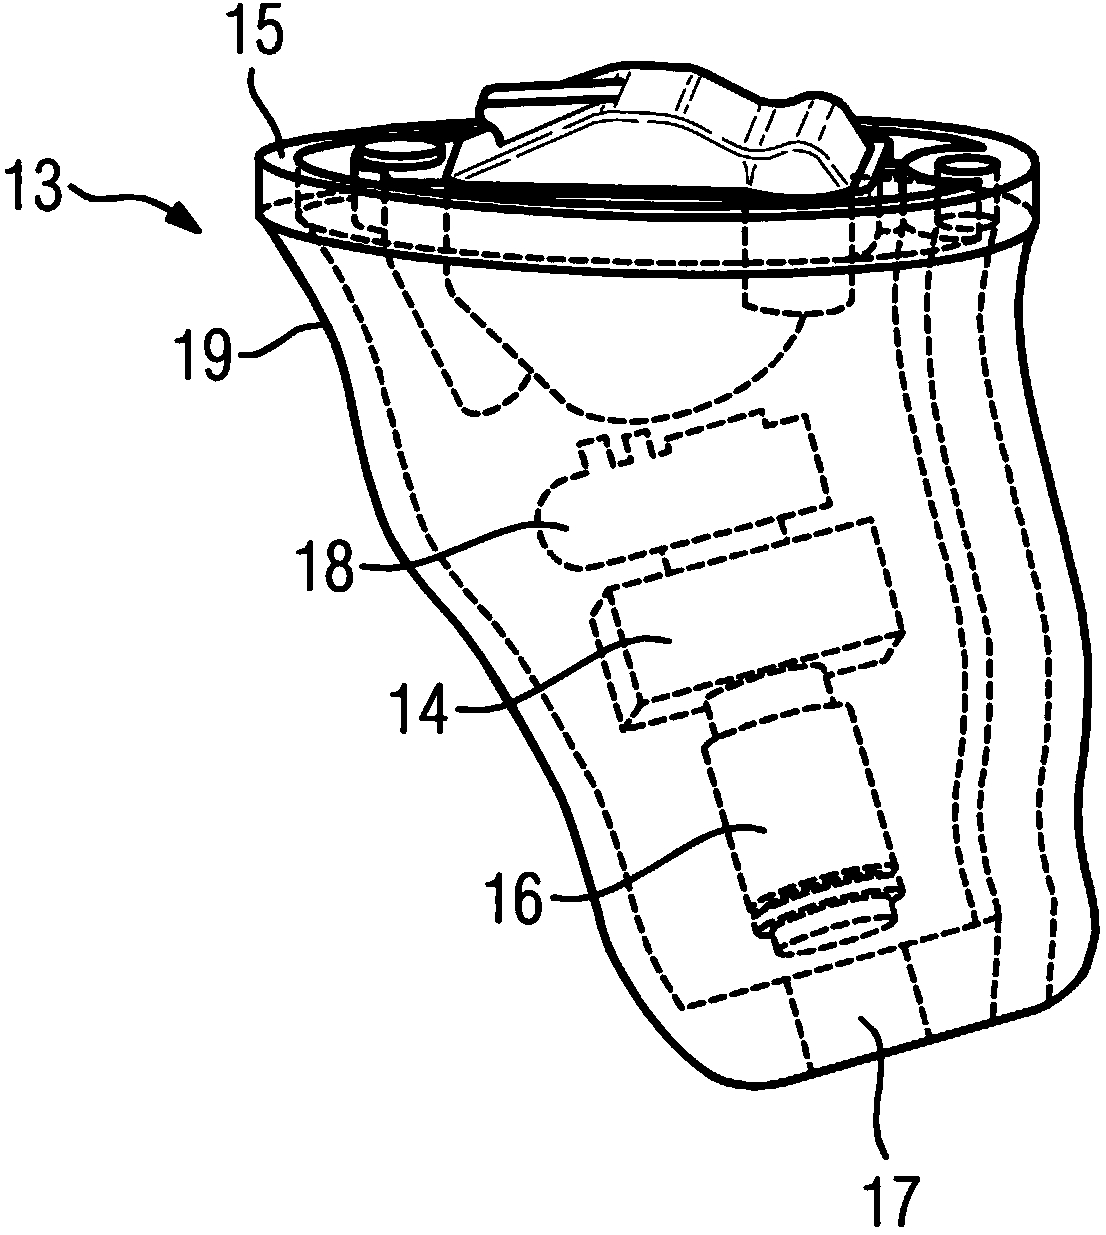 Antenna device for hearing instruments